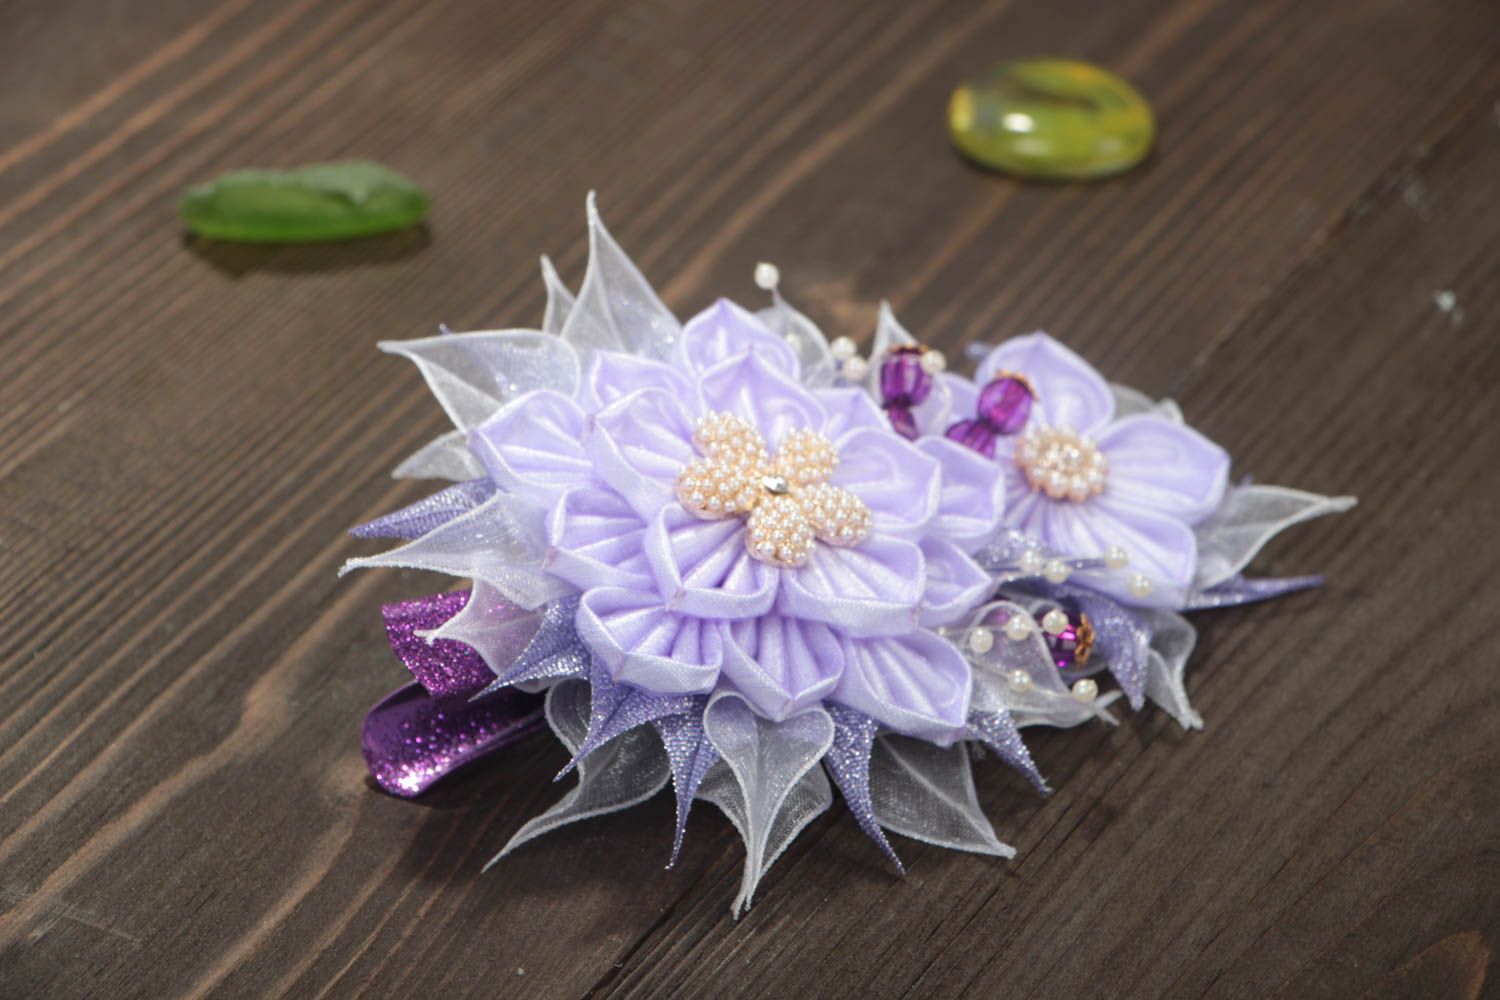 Handcrafted textile flower barrette kanzashi ideas handmade gifts for her photo 1